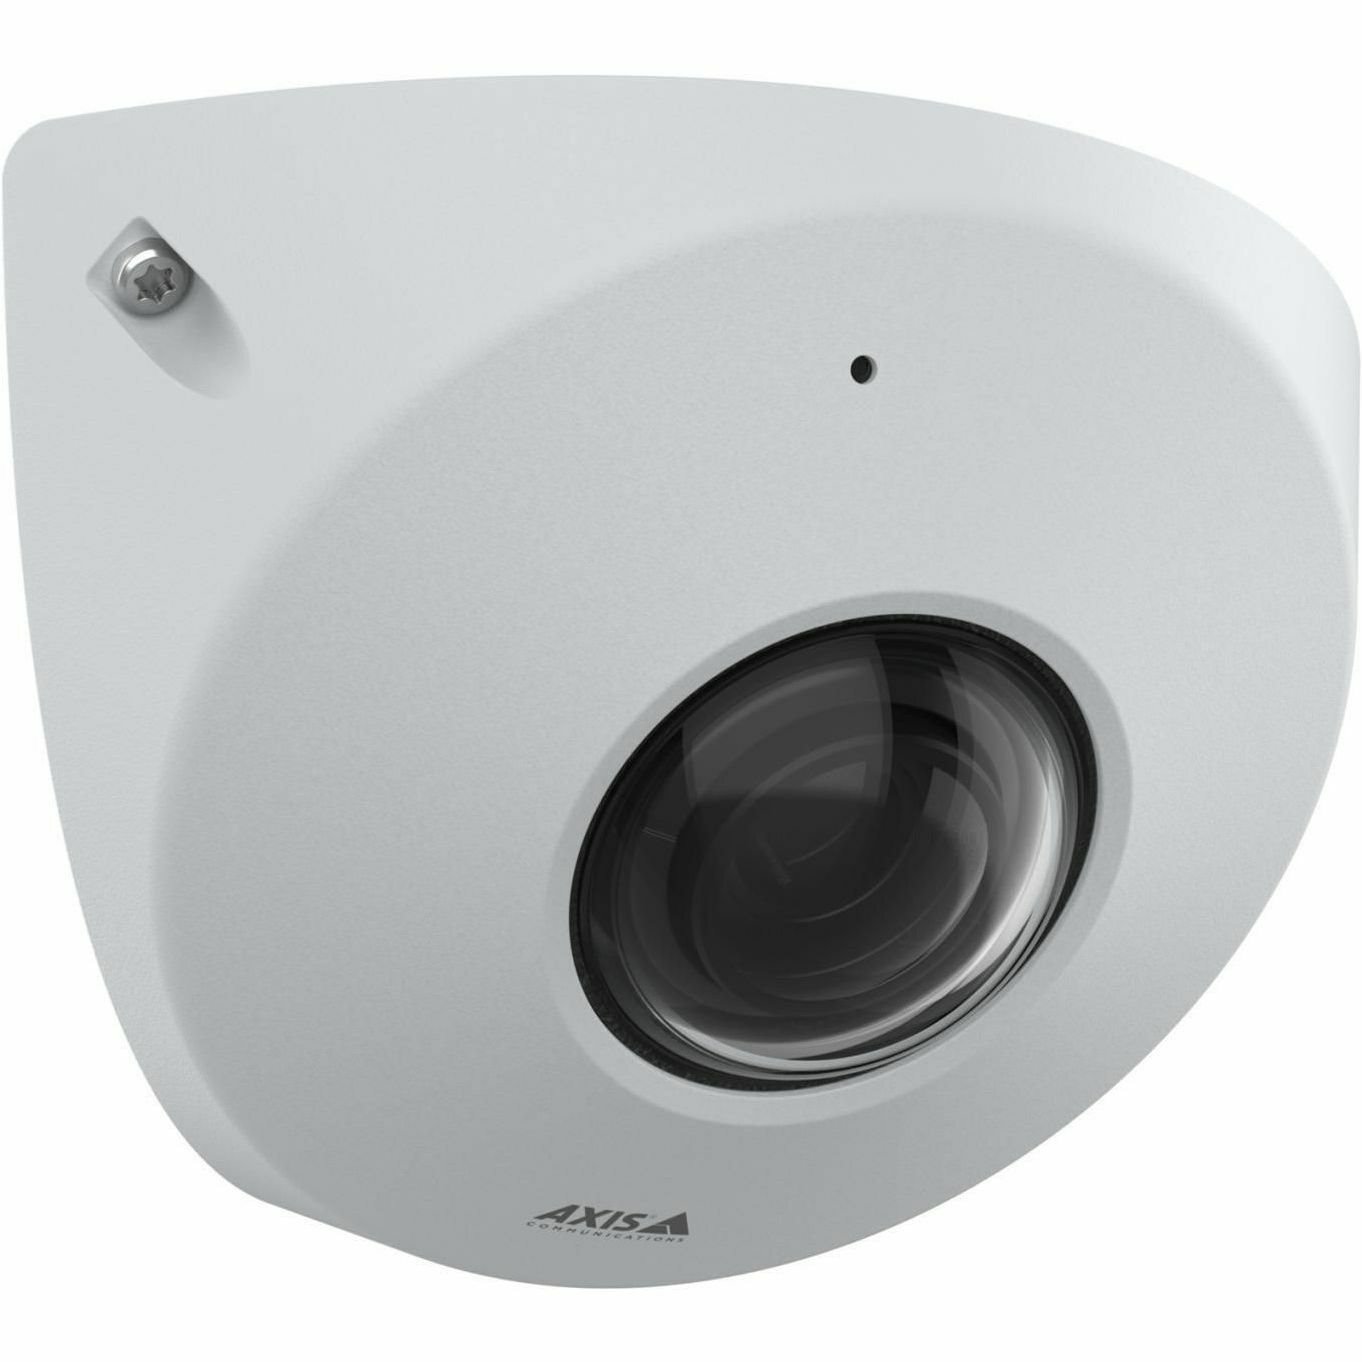 AXIS P9117-PV 6 Megapixel Indoor Network Camera - Colour - Dome - White - TAA Compliant